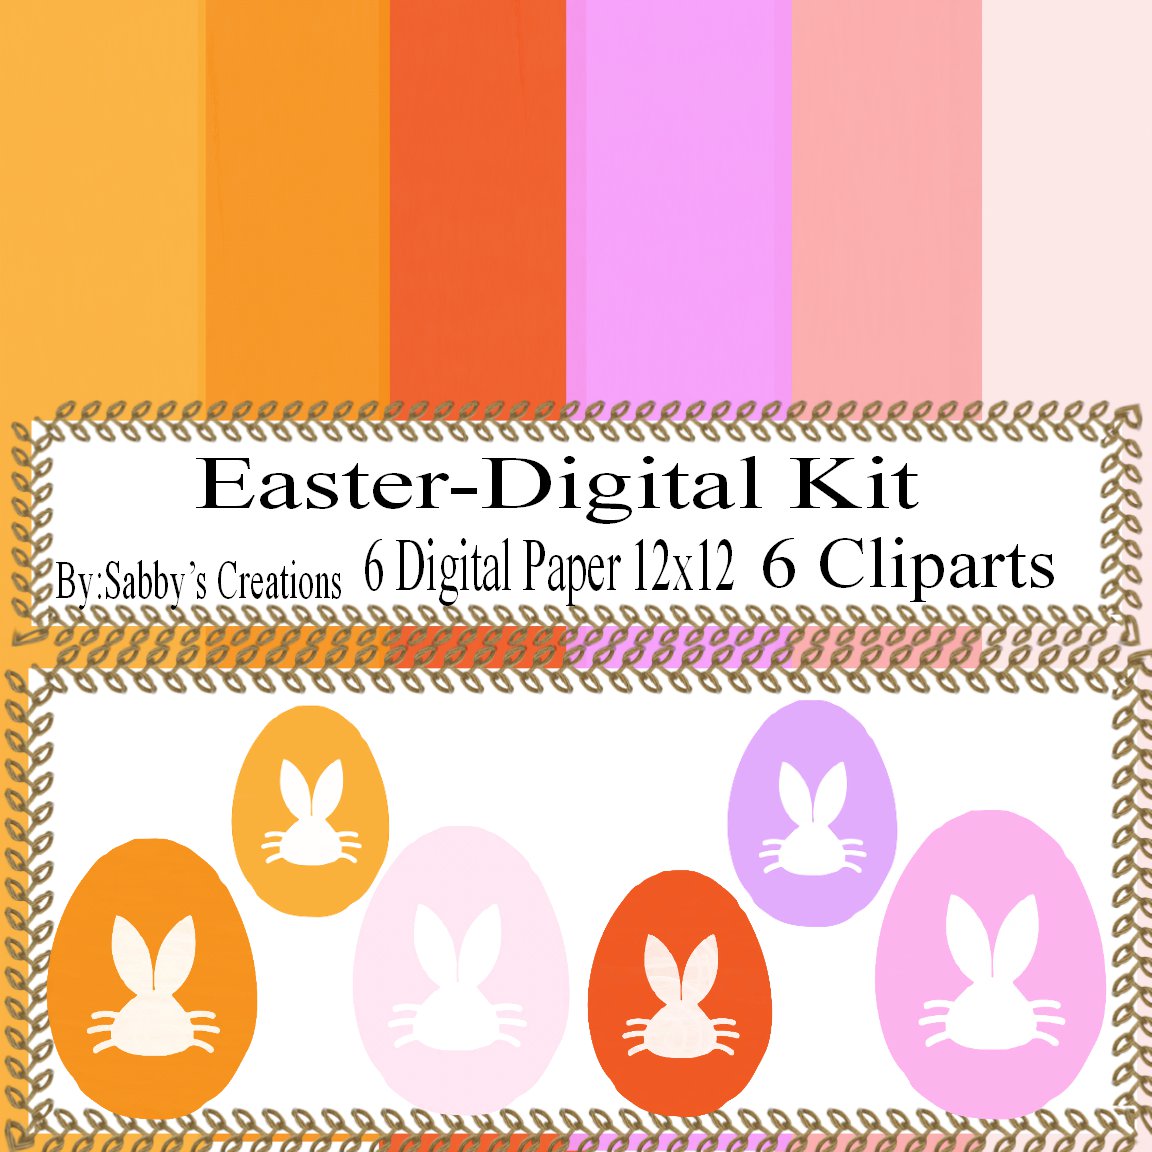 Easter Digital Kit i-Digtial Paper-Egg-Bunny-Art Clip-Gift Tag-Jewelry-T shirt